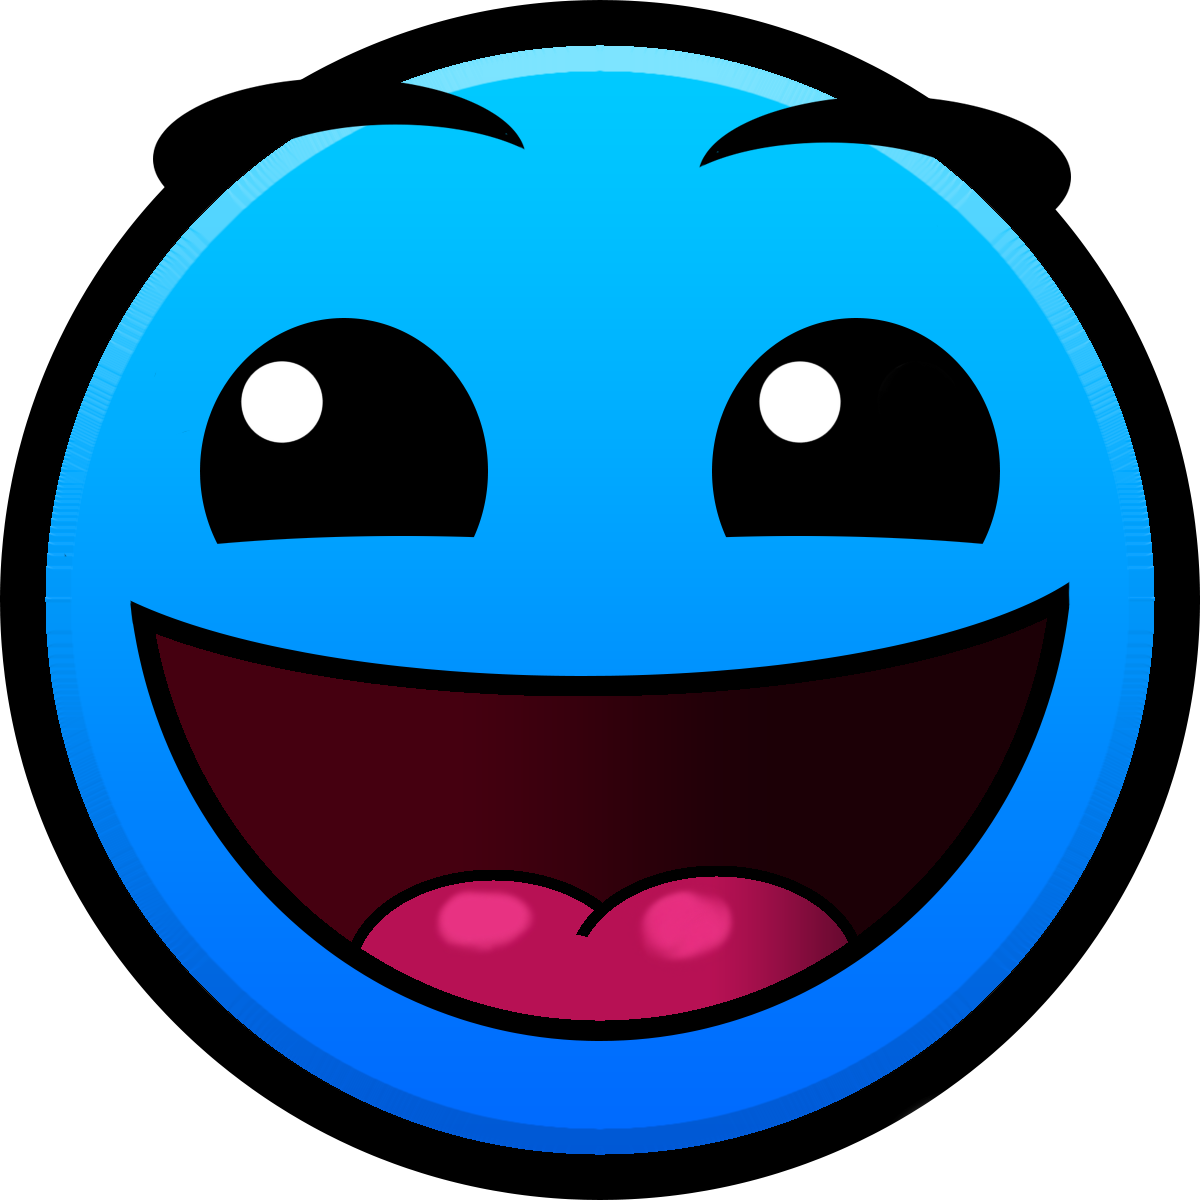 Image Result For Geometry Dash Faces - Easy Difficulty Geometry Dash (1200x1200)